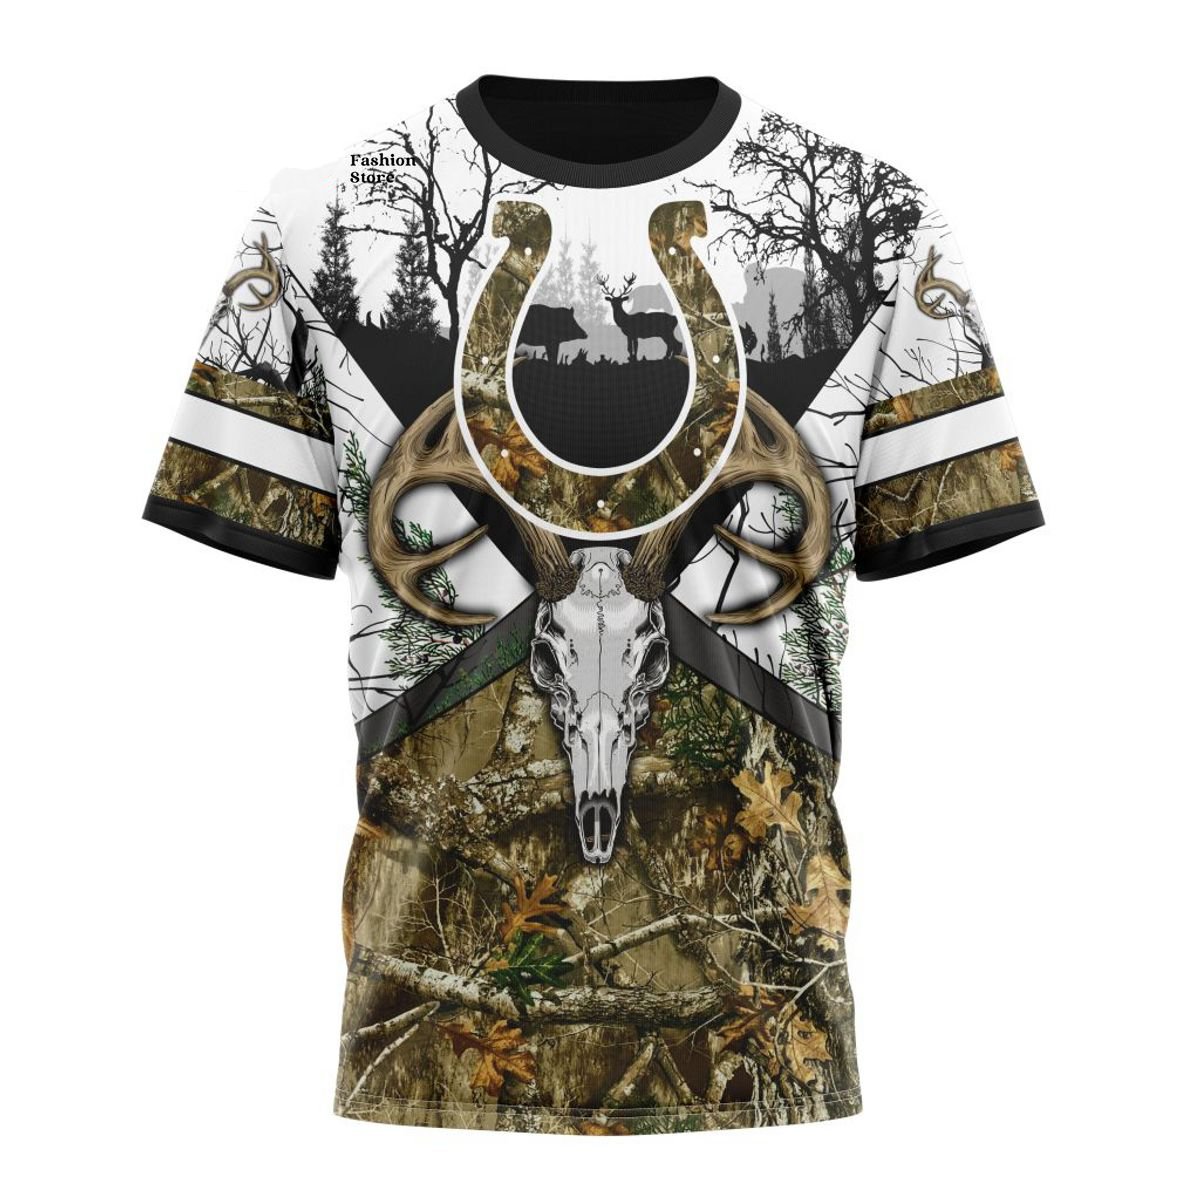 INDIANAPOLIS COLTS DEER SKULL AND FOREST 3D HOODIE